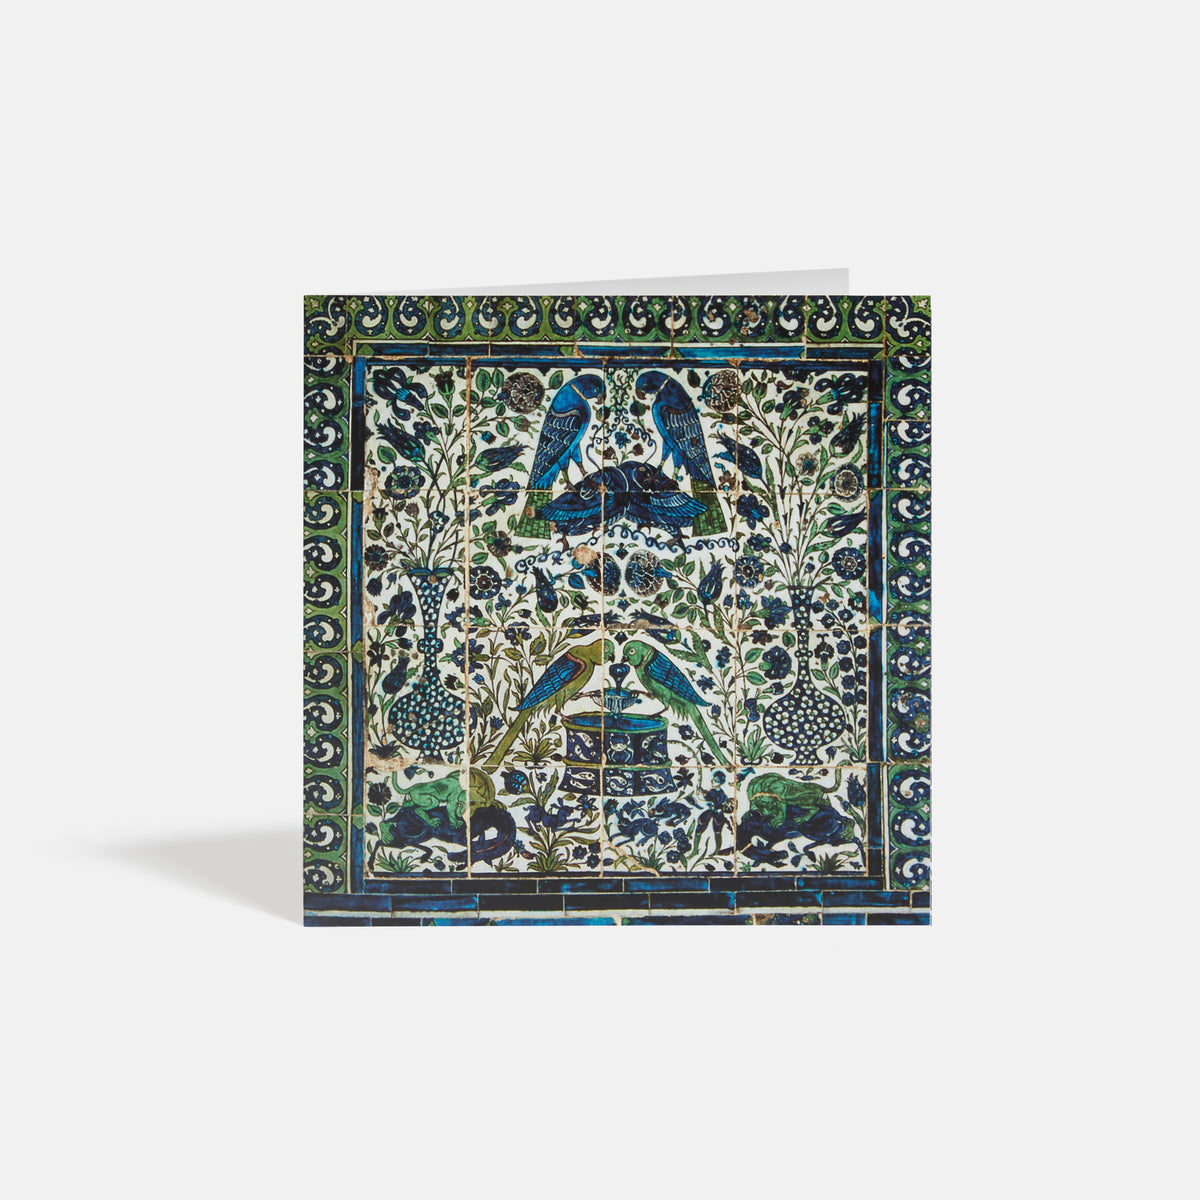 Damascus Panel with William De Morgan Parrot Tile, Greetings Card